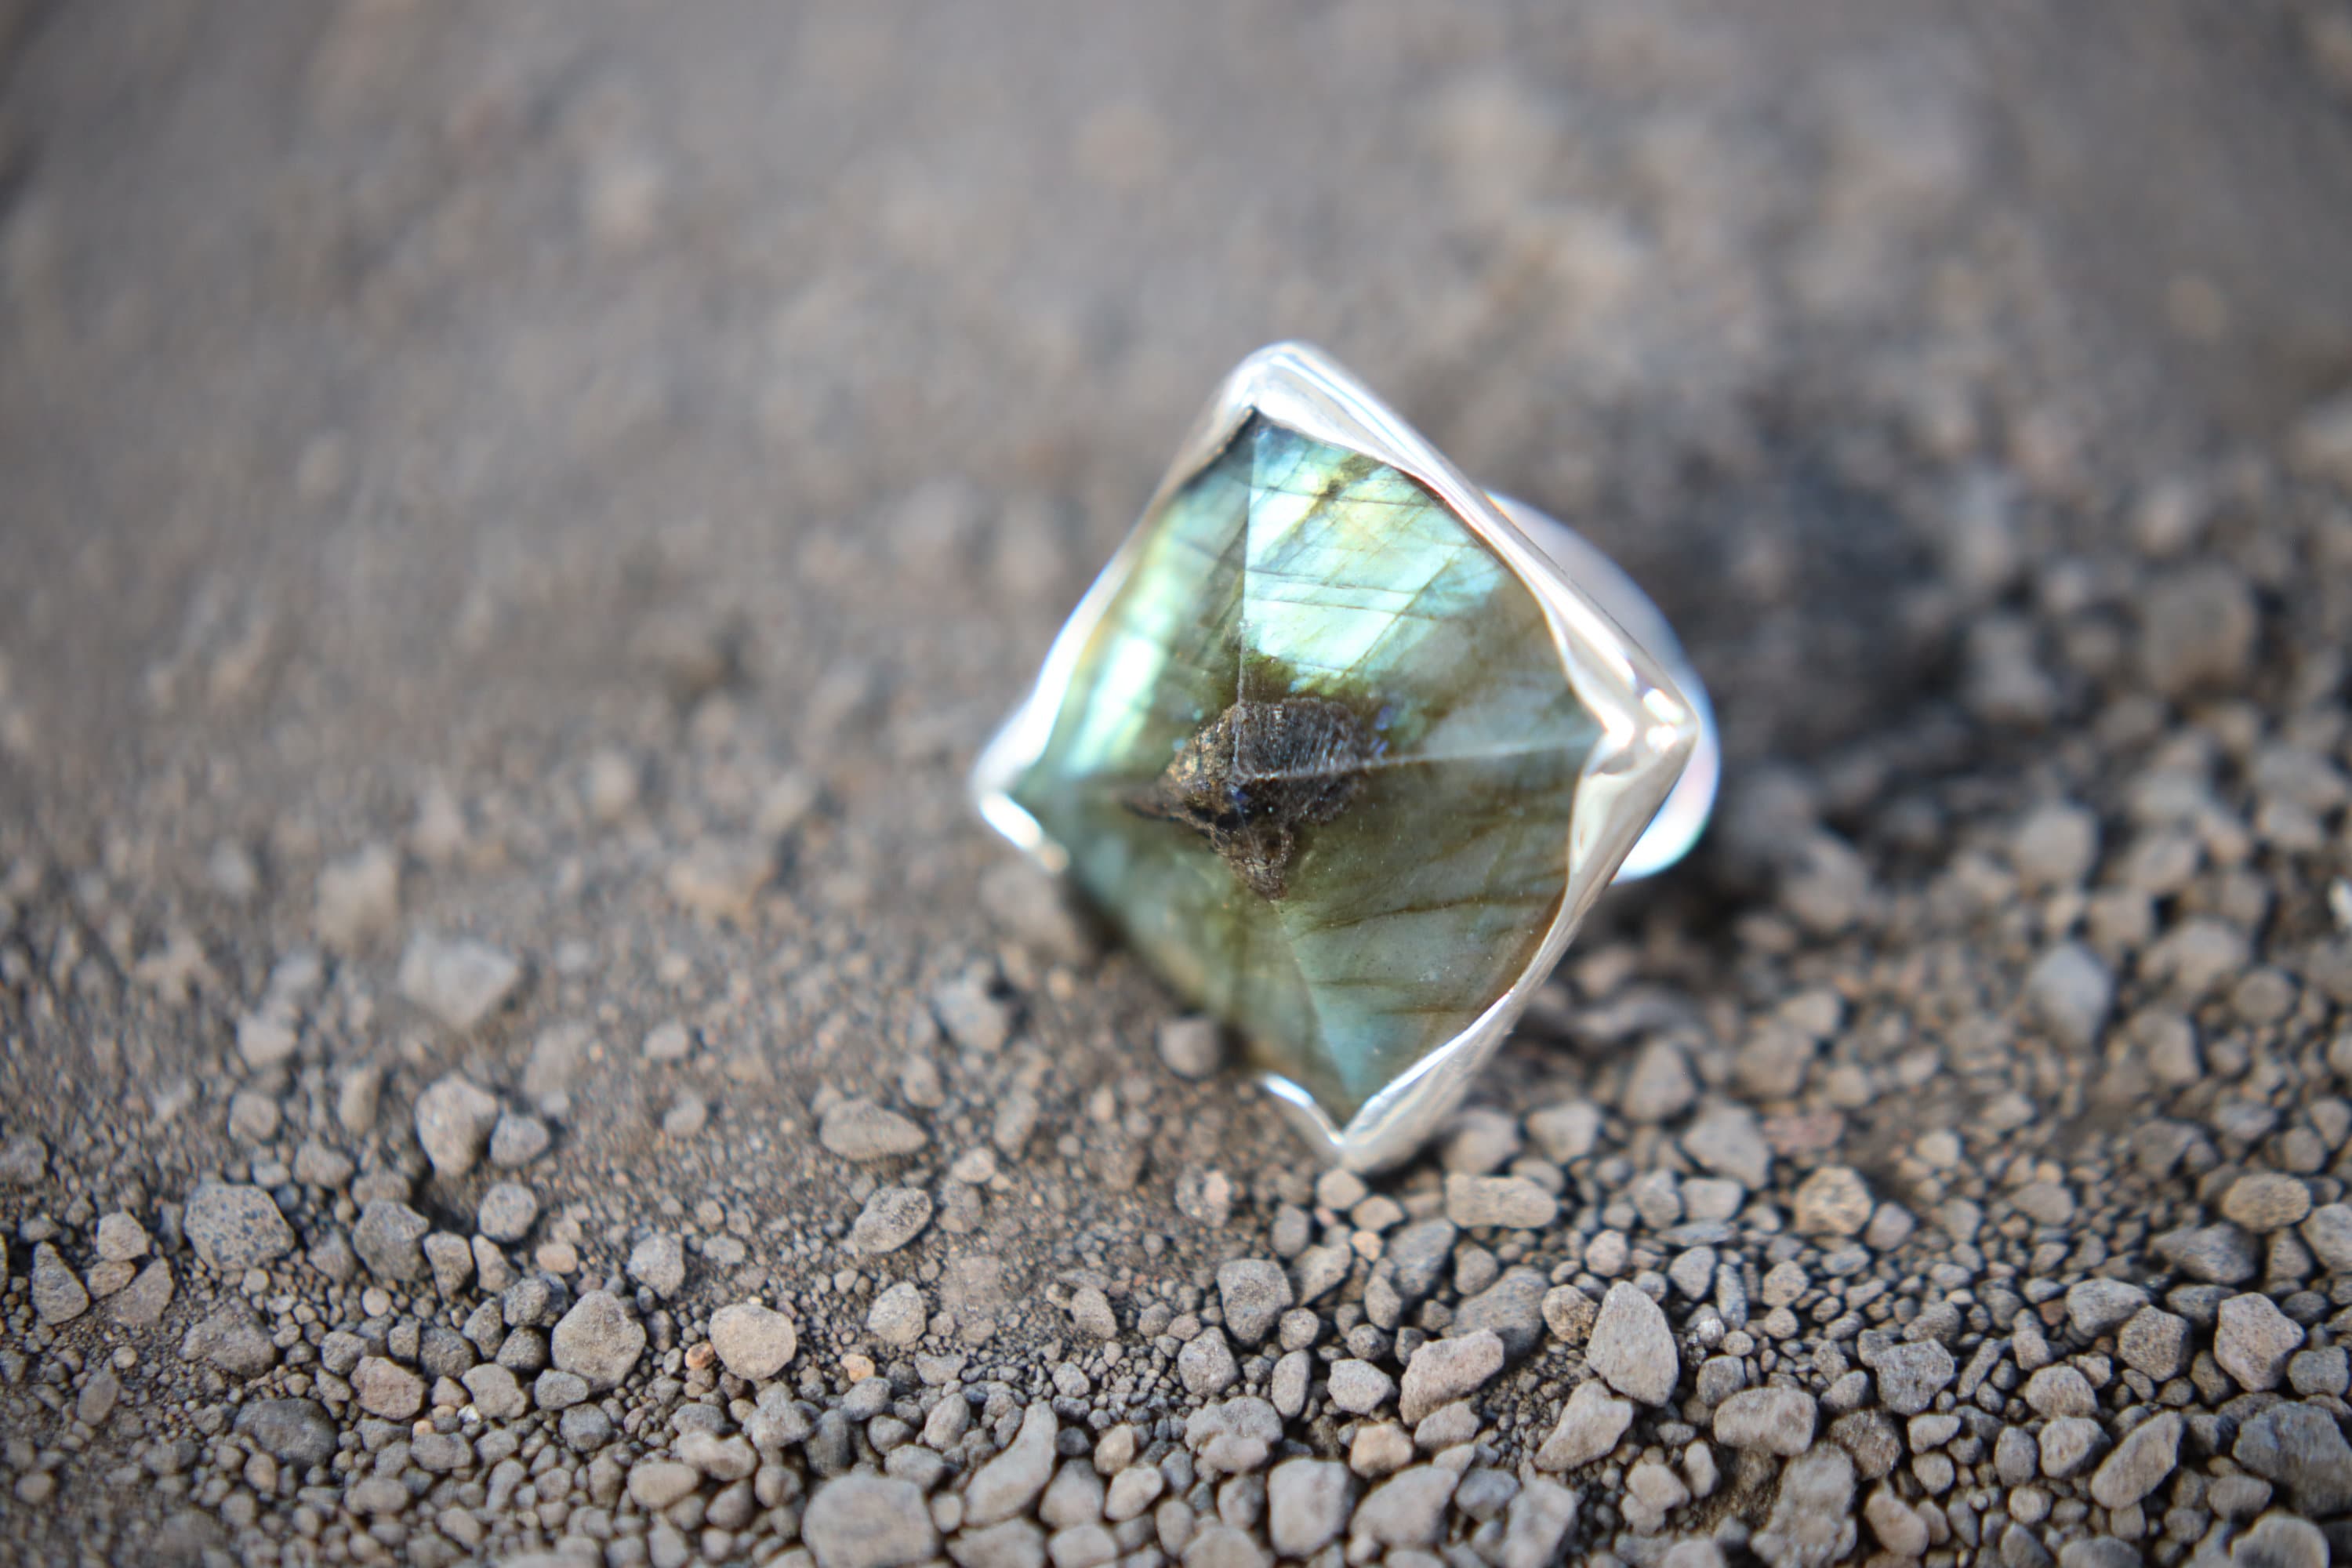 A Sturdy Embrace of Mystical Gleam: Adjustable Sterling Silver Ring with Square Labradorite - Unisex - Size 5-12 US - NO/02